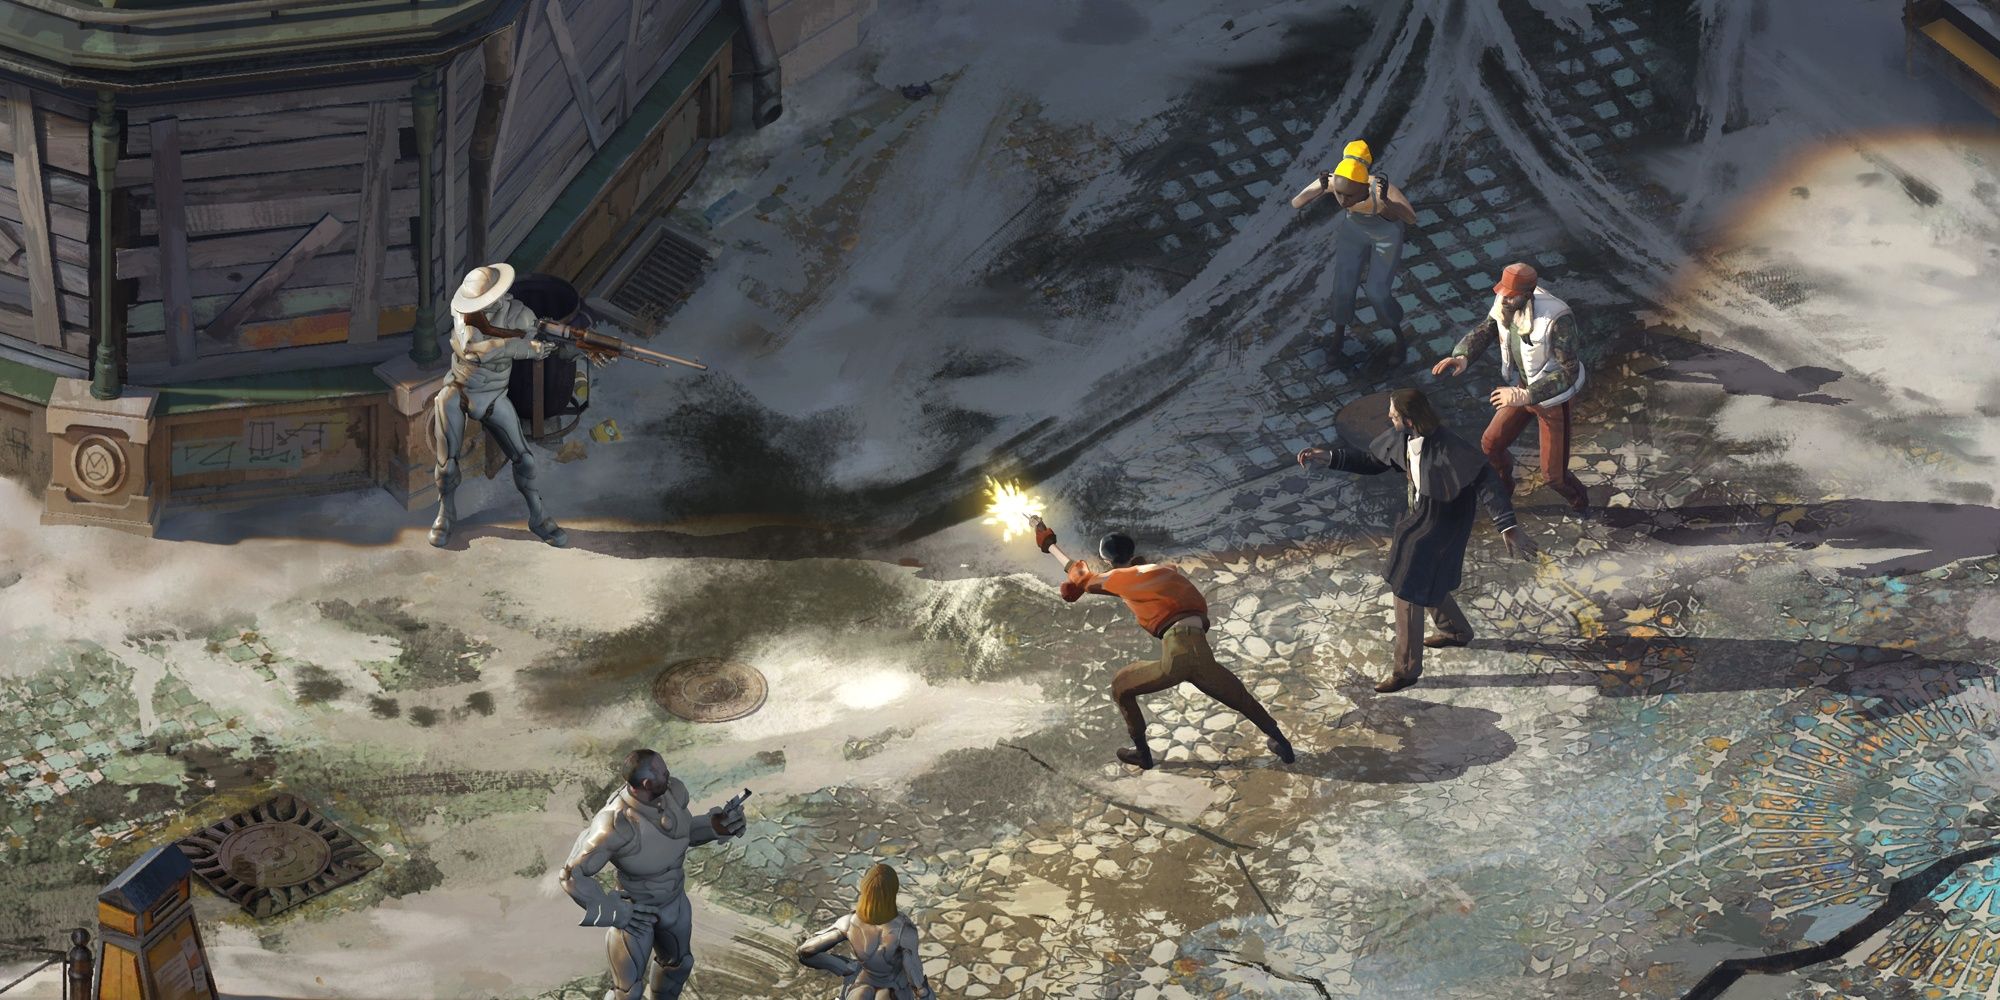 A stand-off in Disco Elysium